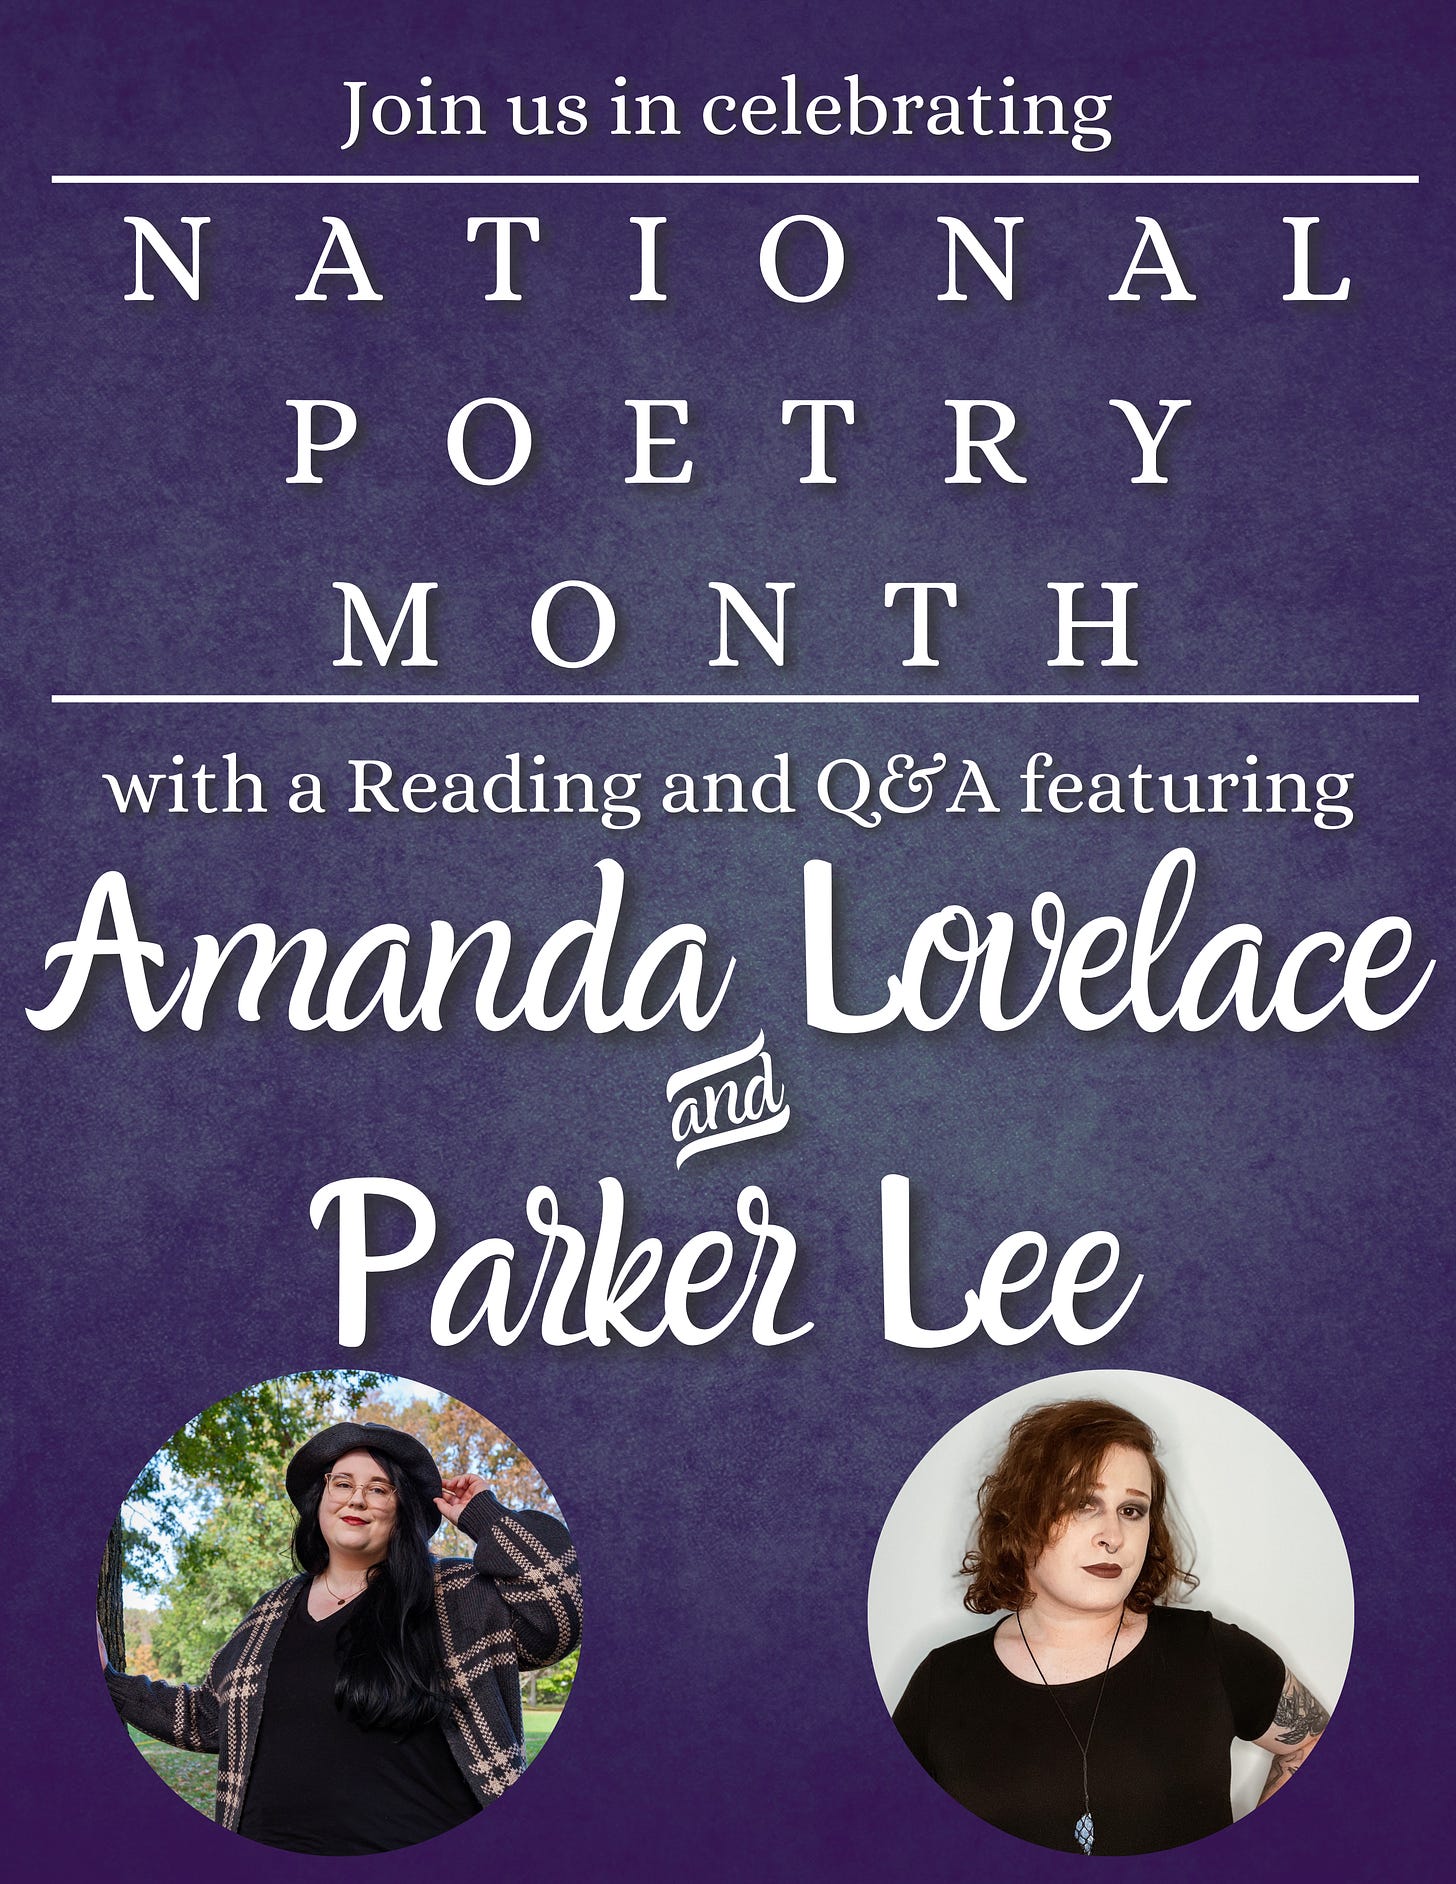 an event flyer. it reads: join us in celebrating national poetry month with a reading and q&a featuring amanda lovelace and parker lee. at the bottom, there are two circles. the left circle contains a photo of amanda lovelace, and the right circle contains a photo of parker lee.